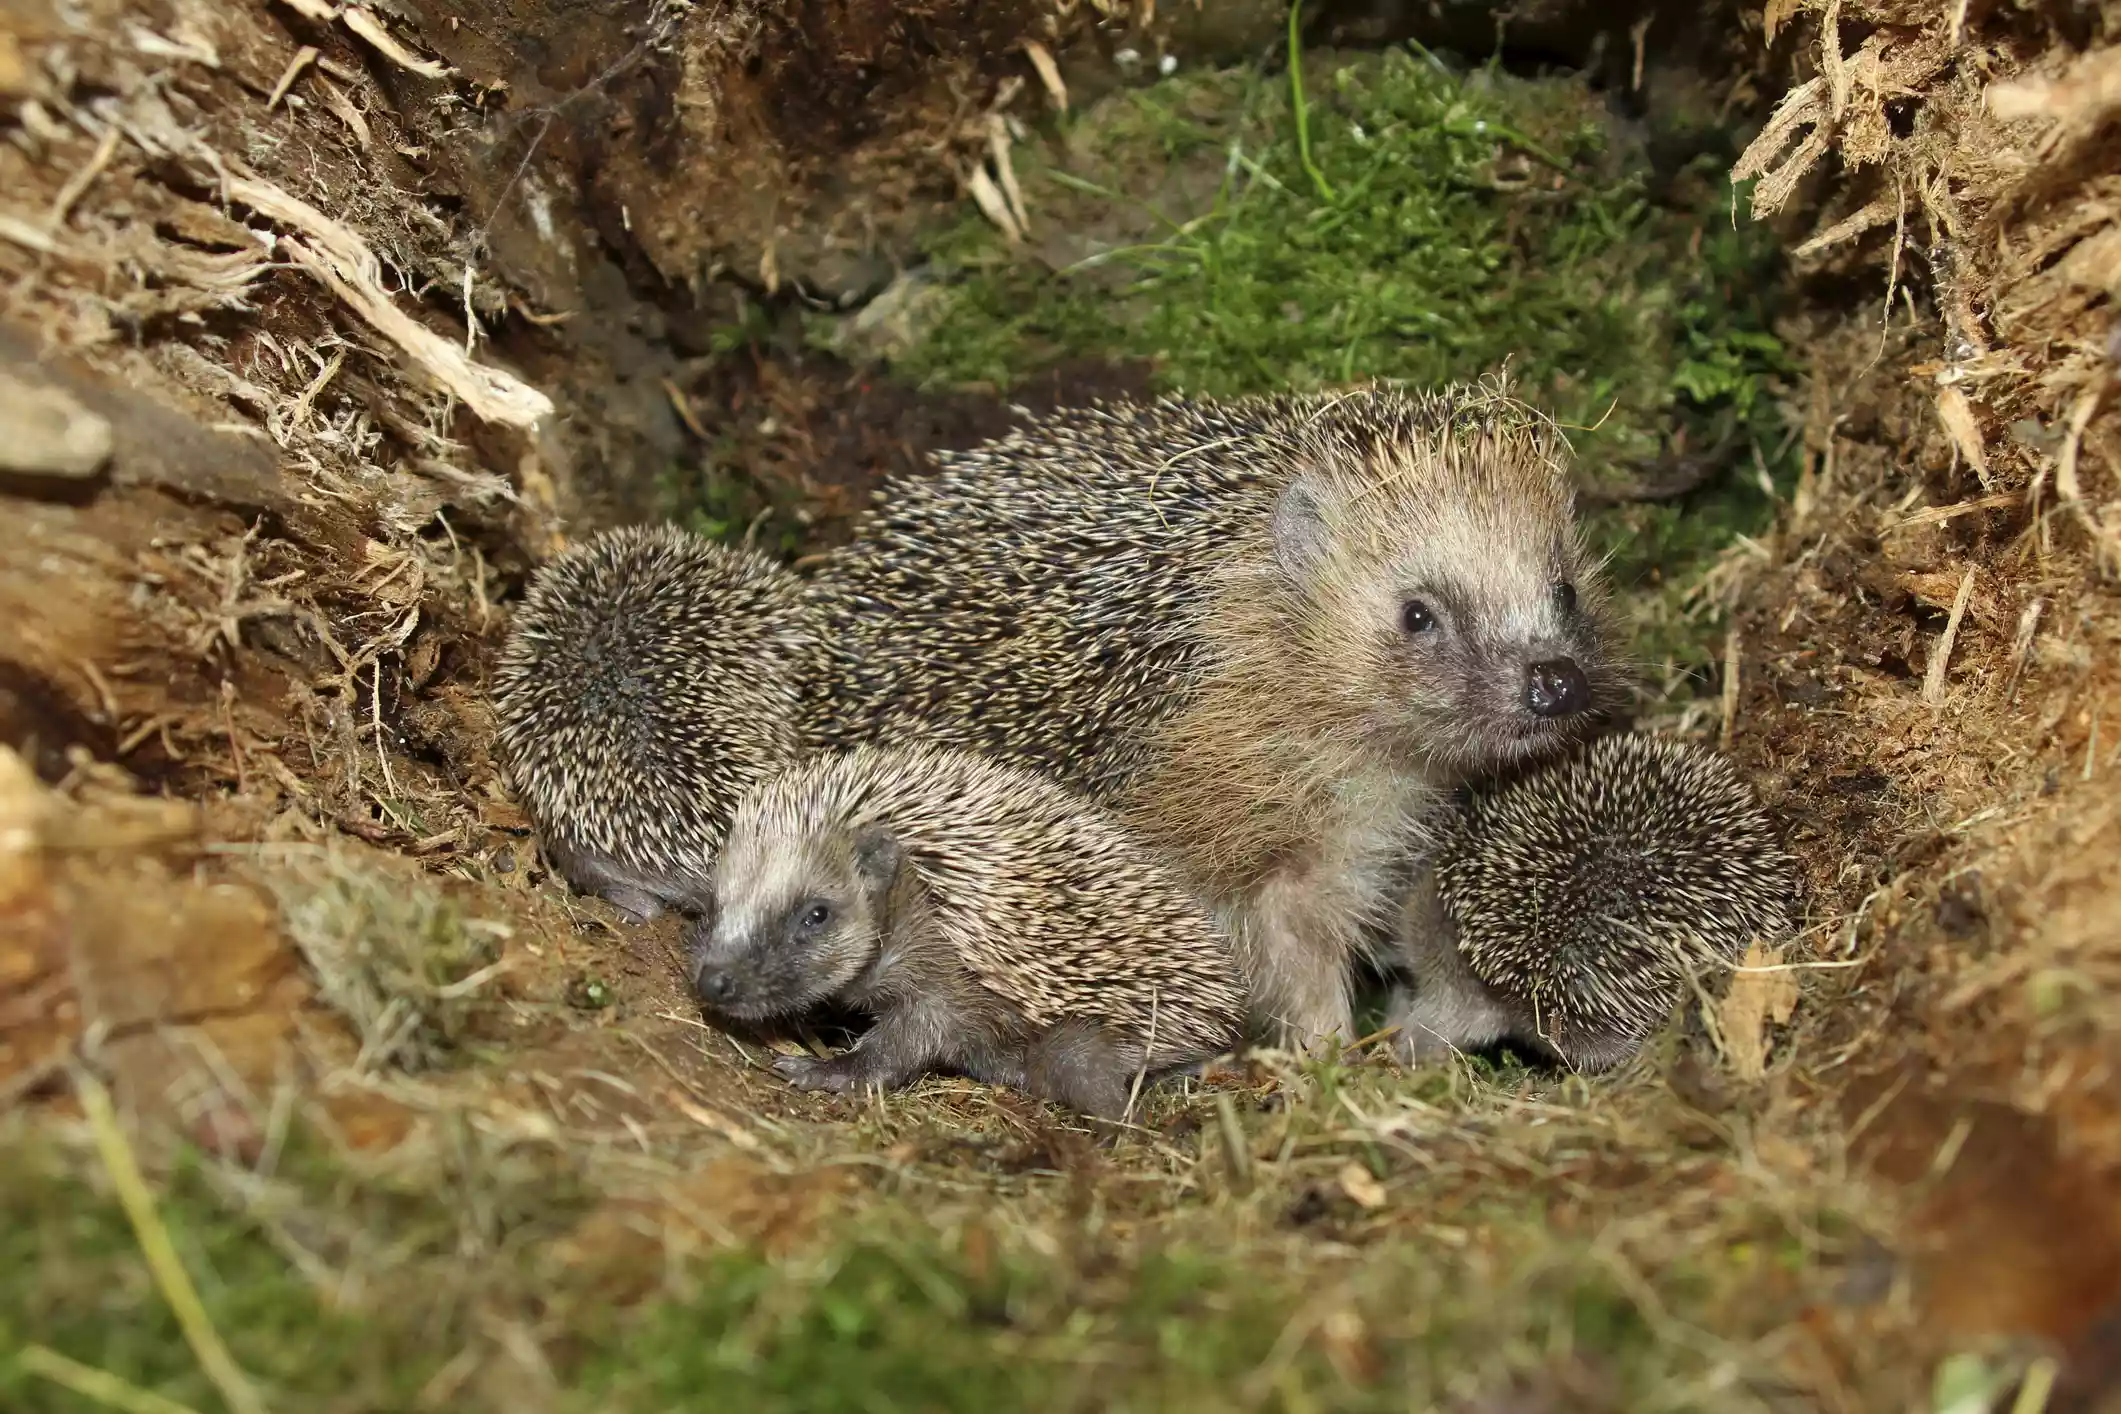 An array of hedgehogs, mother and babies, at their nest in a tree stump